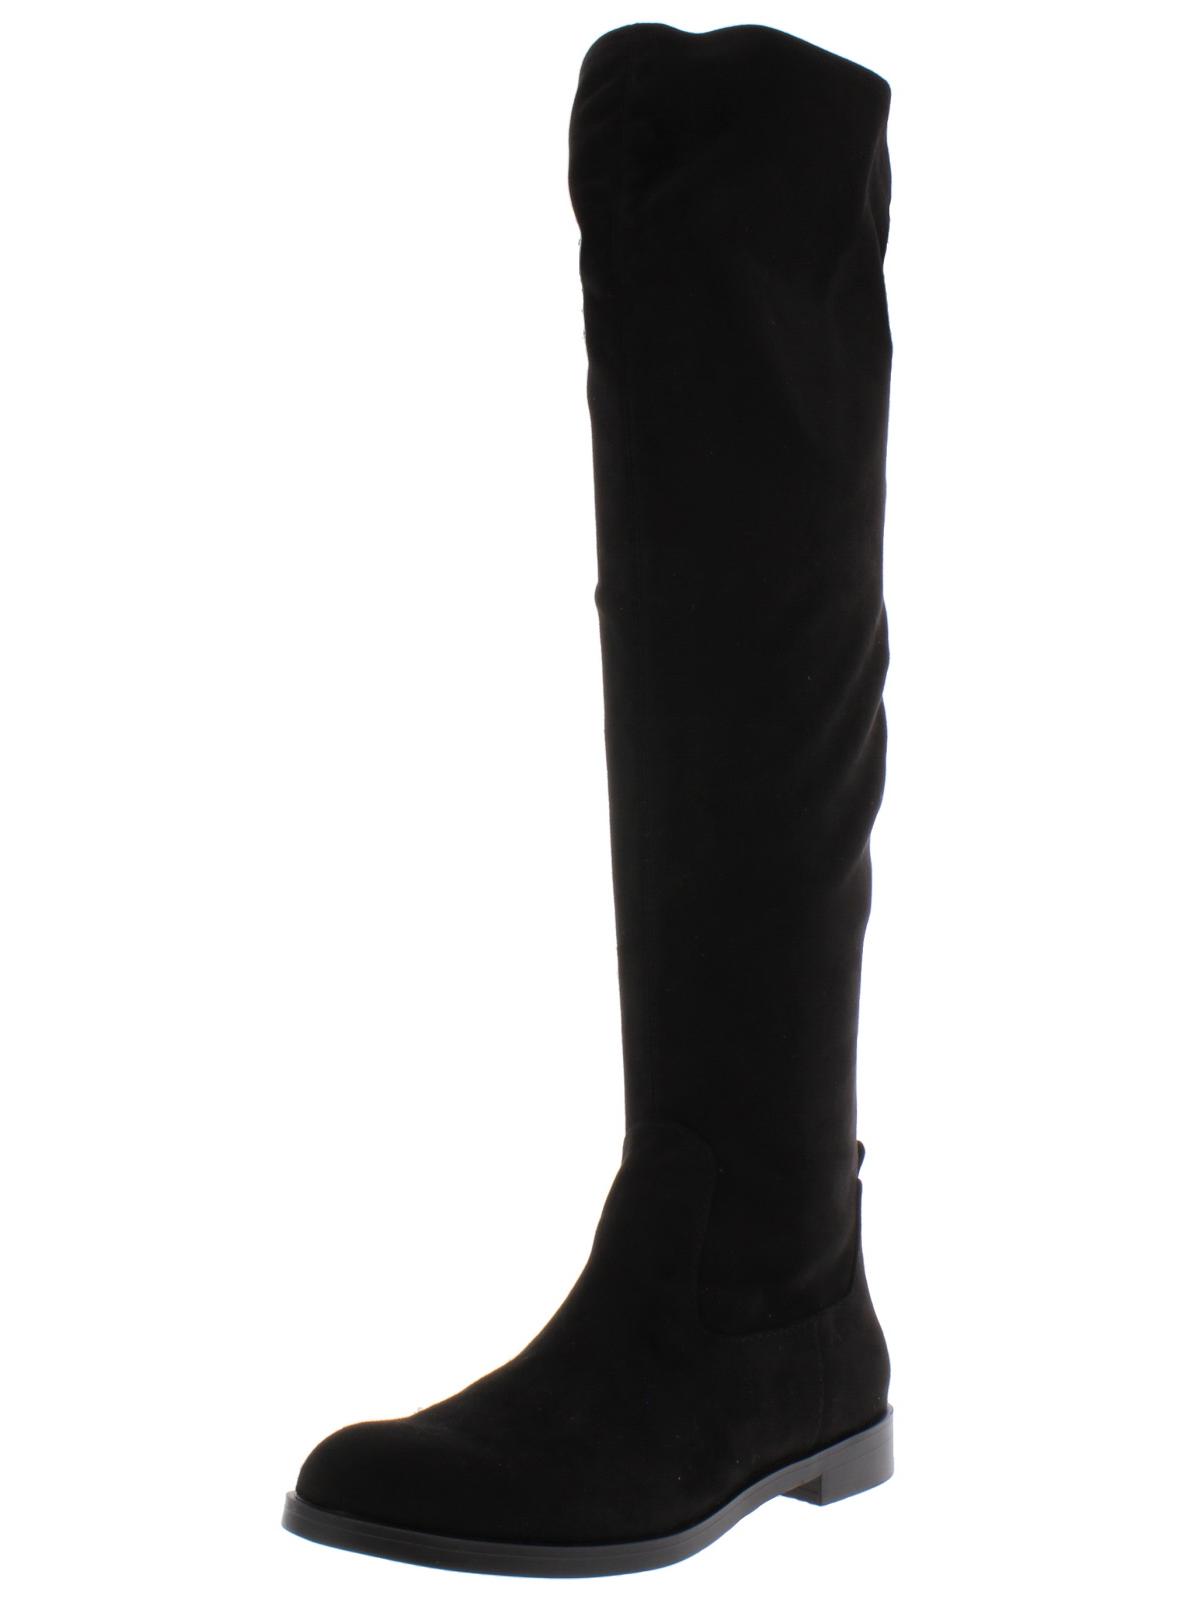 KENNETH COLE REACTION Wind-y Womens Faux Suede Tall Over-The-Knee Boots